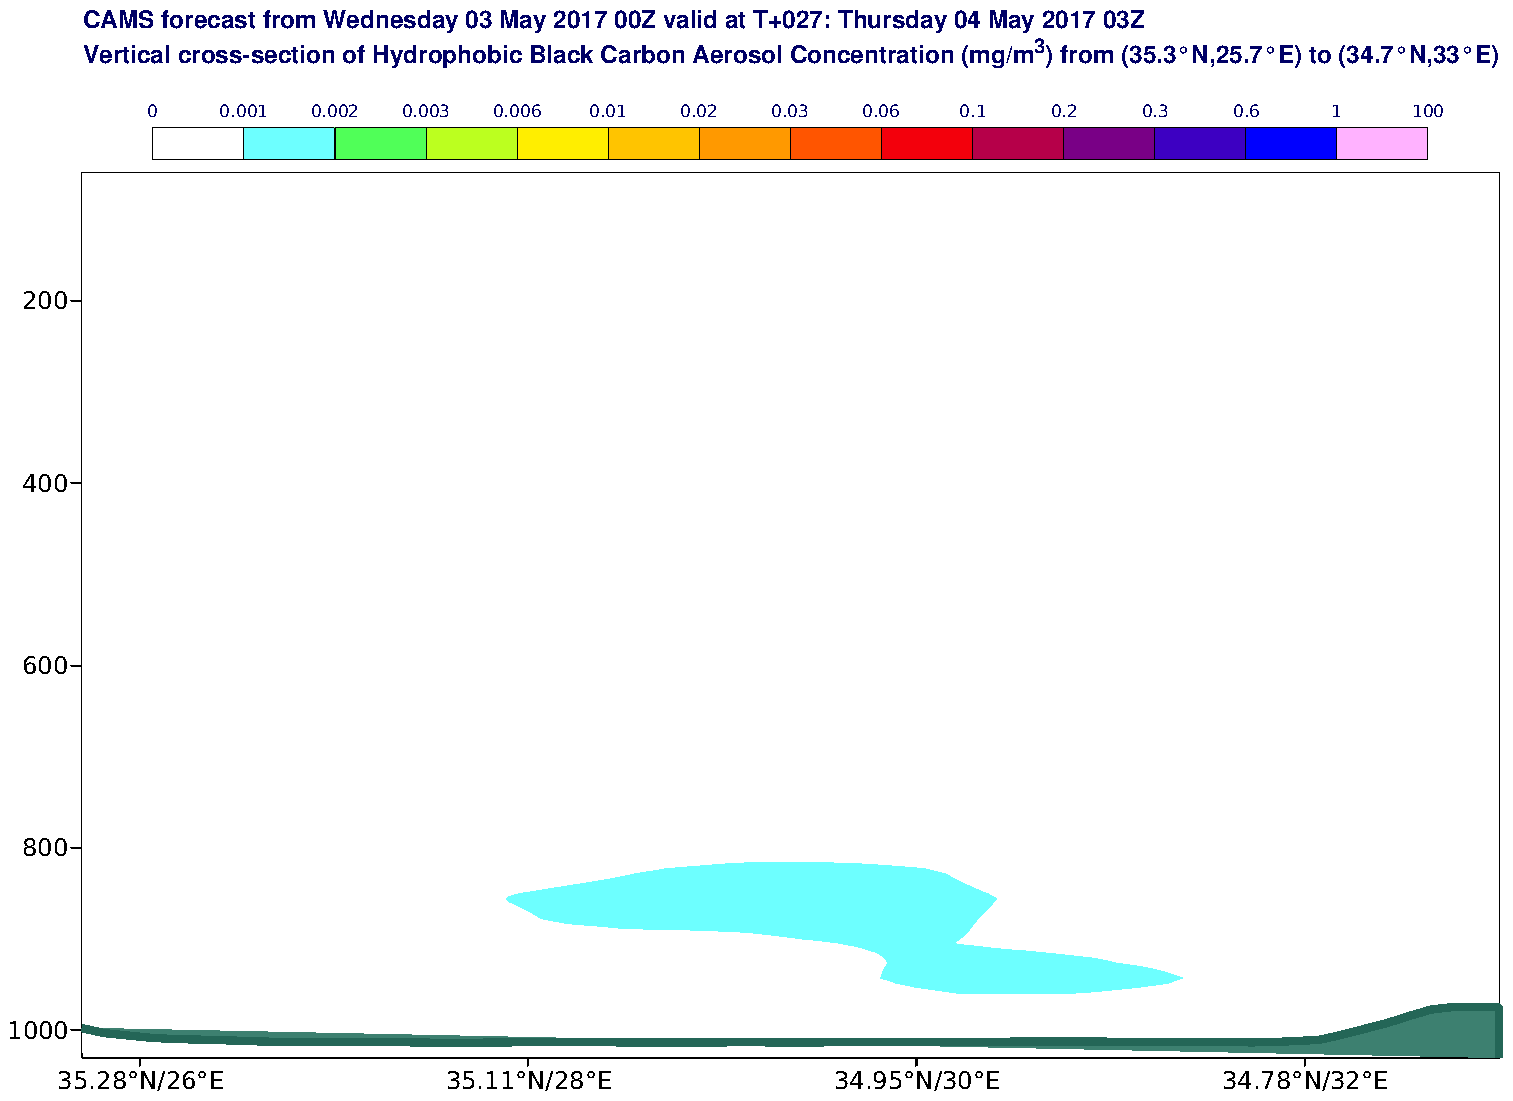 Vertical cross-section of Hydrophobic Black Carbon Aerosol Concentration (mg/m3) valid at T27 - 2017-05-04 03:00